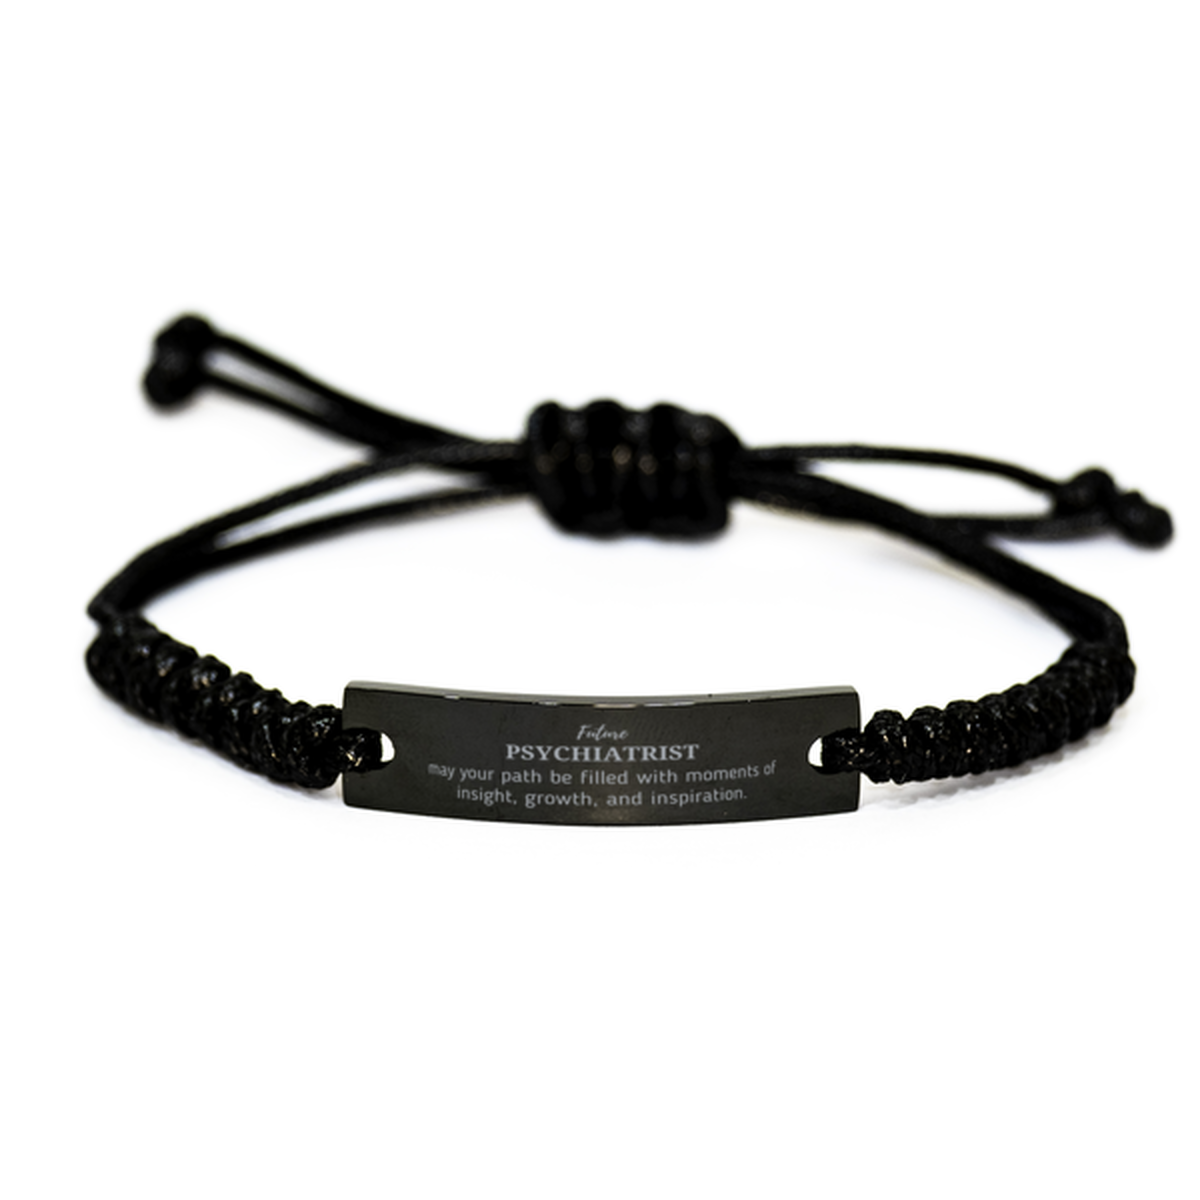 Future Psychiatrist Gifts, May your path be filled with moments of insight, Graduation Gifts for New Psychiatrist, Christmas Unique Black Rope Bracelet For Men, Women, Friends